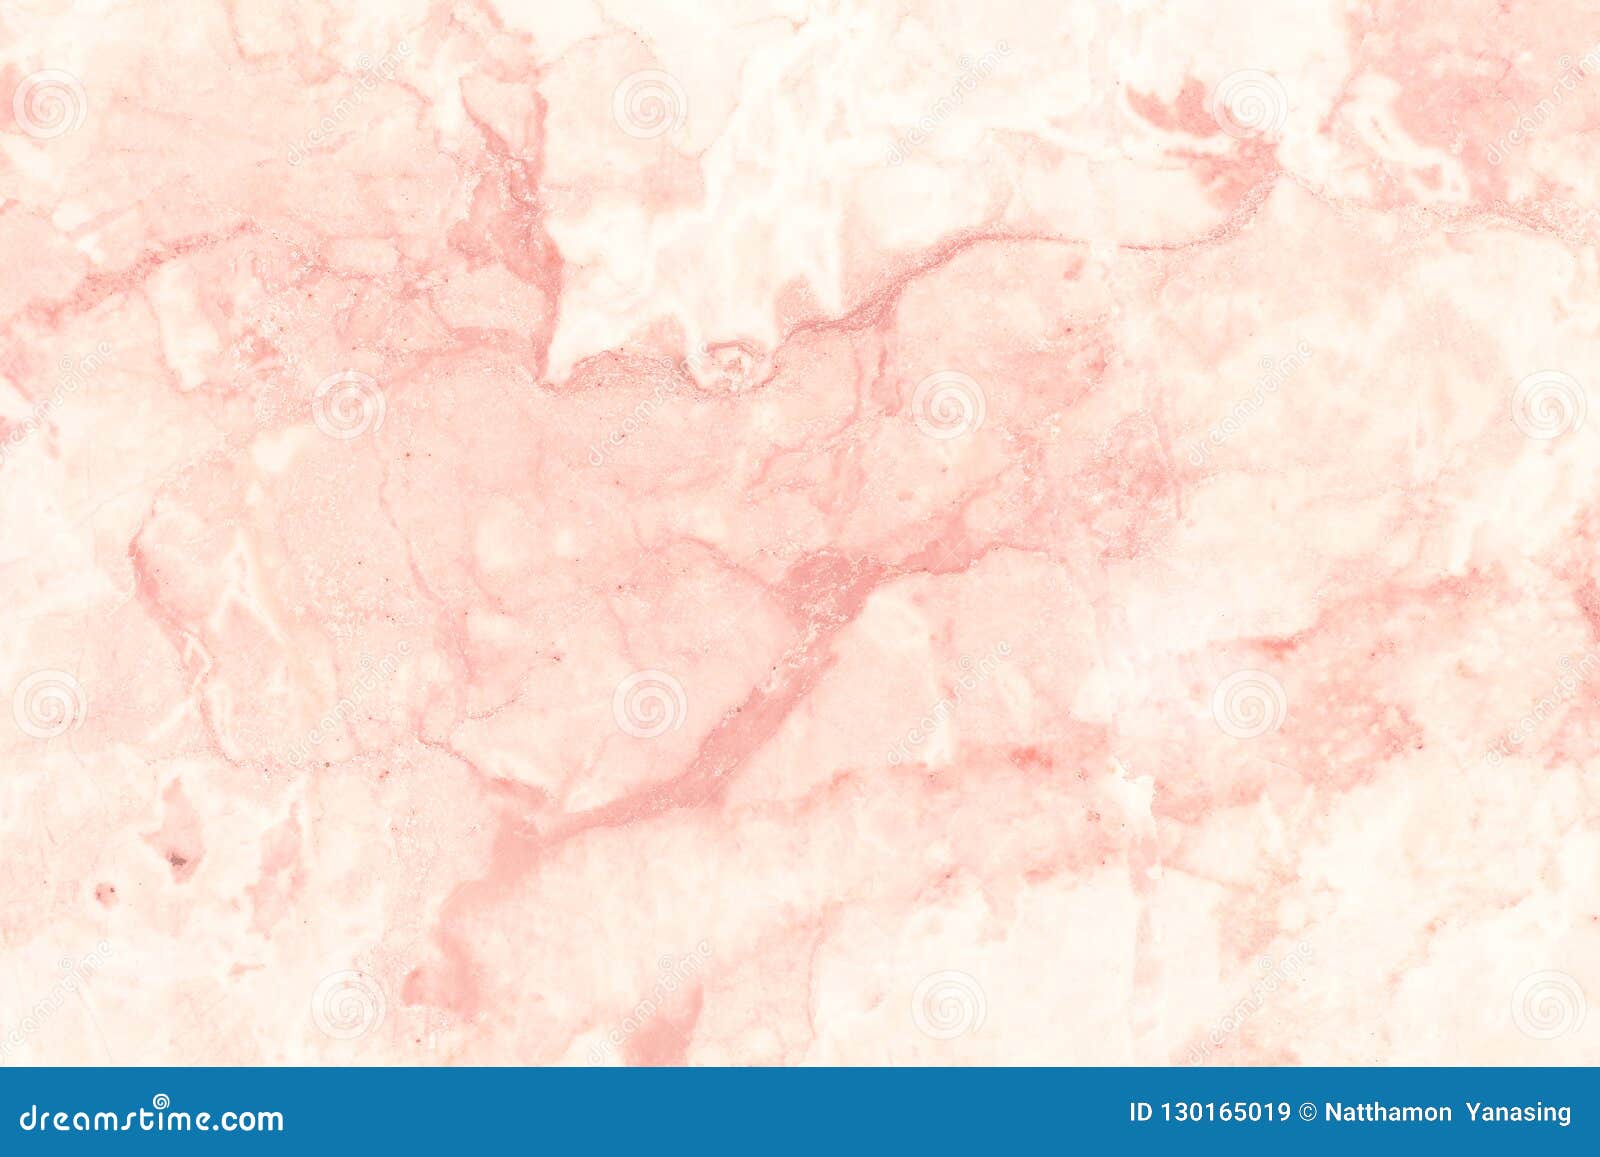 Download Rose Gold Marble Texture Background In Natural Patterns ...